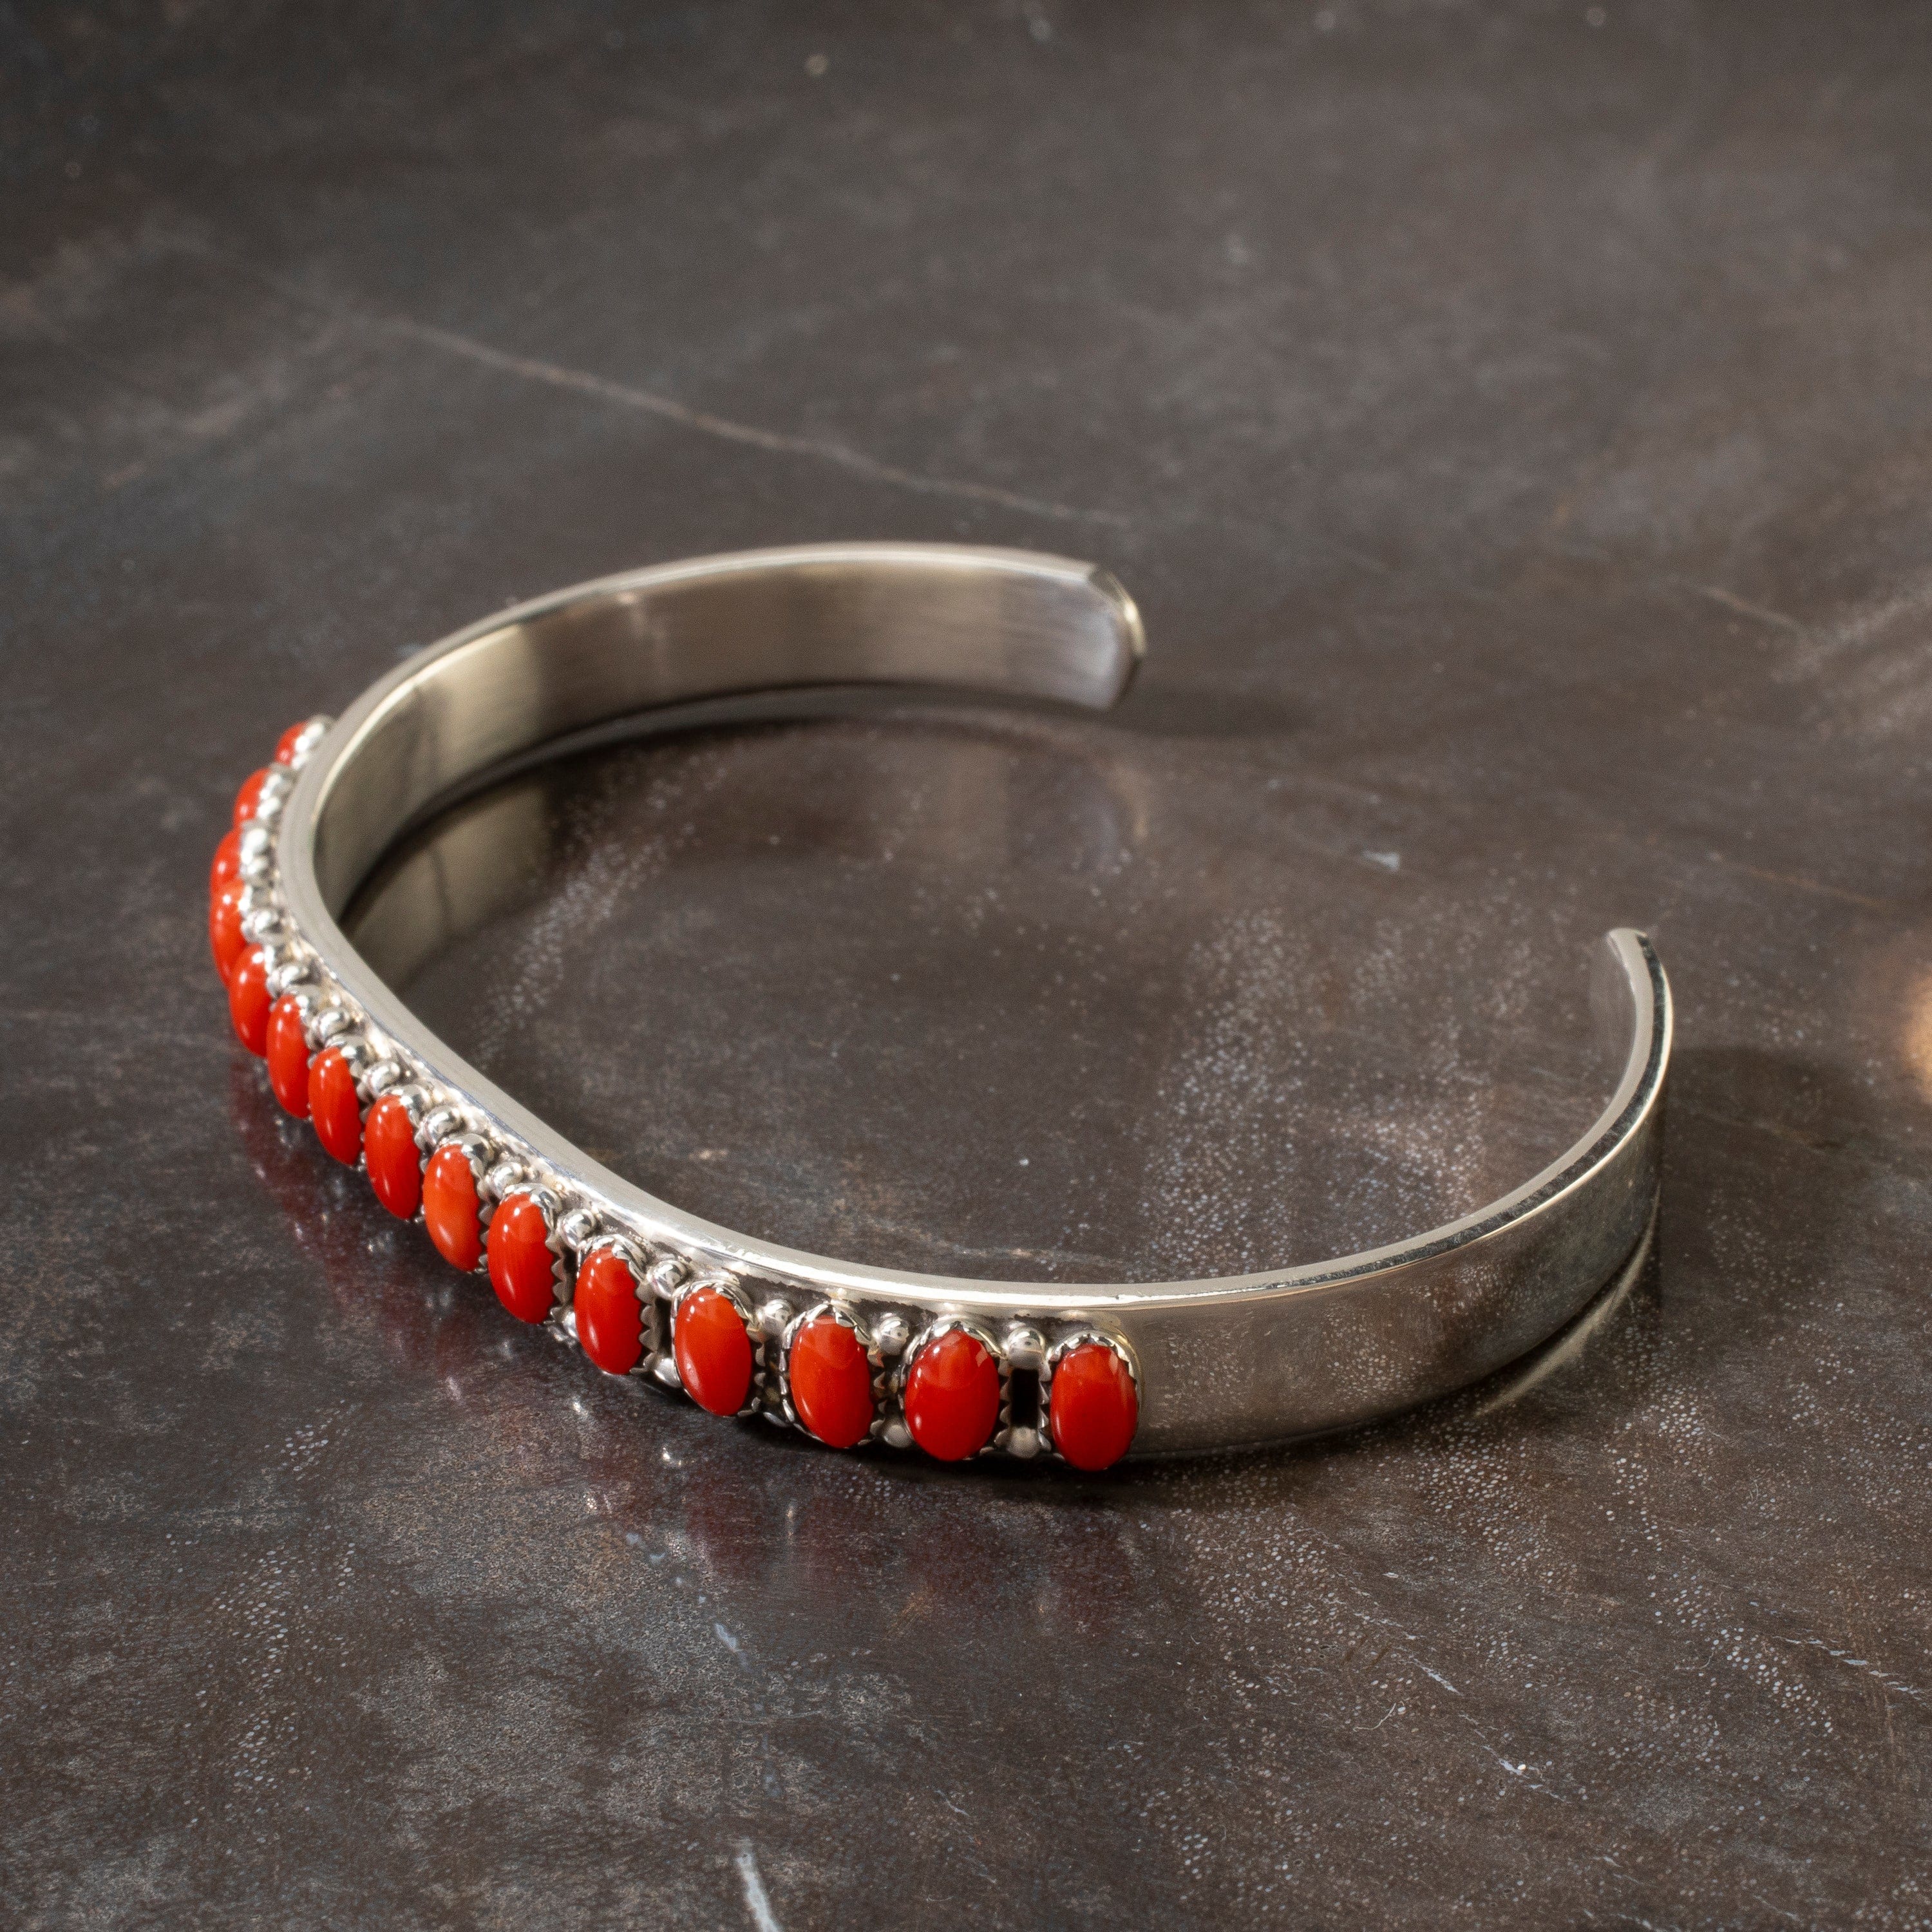 Kalifano Native American Jewelry Patrick Yazzie Navajo Red Coral USA Native American Made 925 Sterling Silver Cuff NAB1200.018